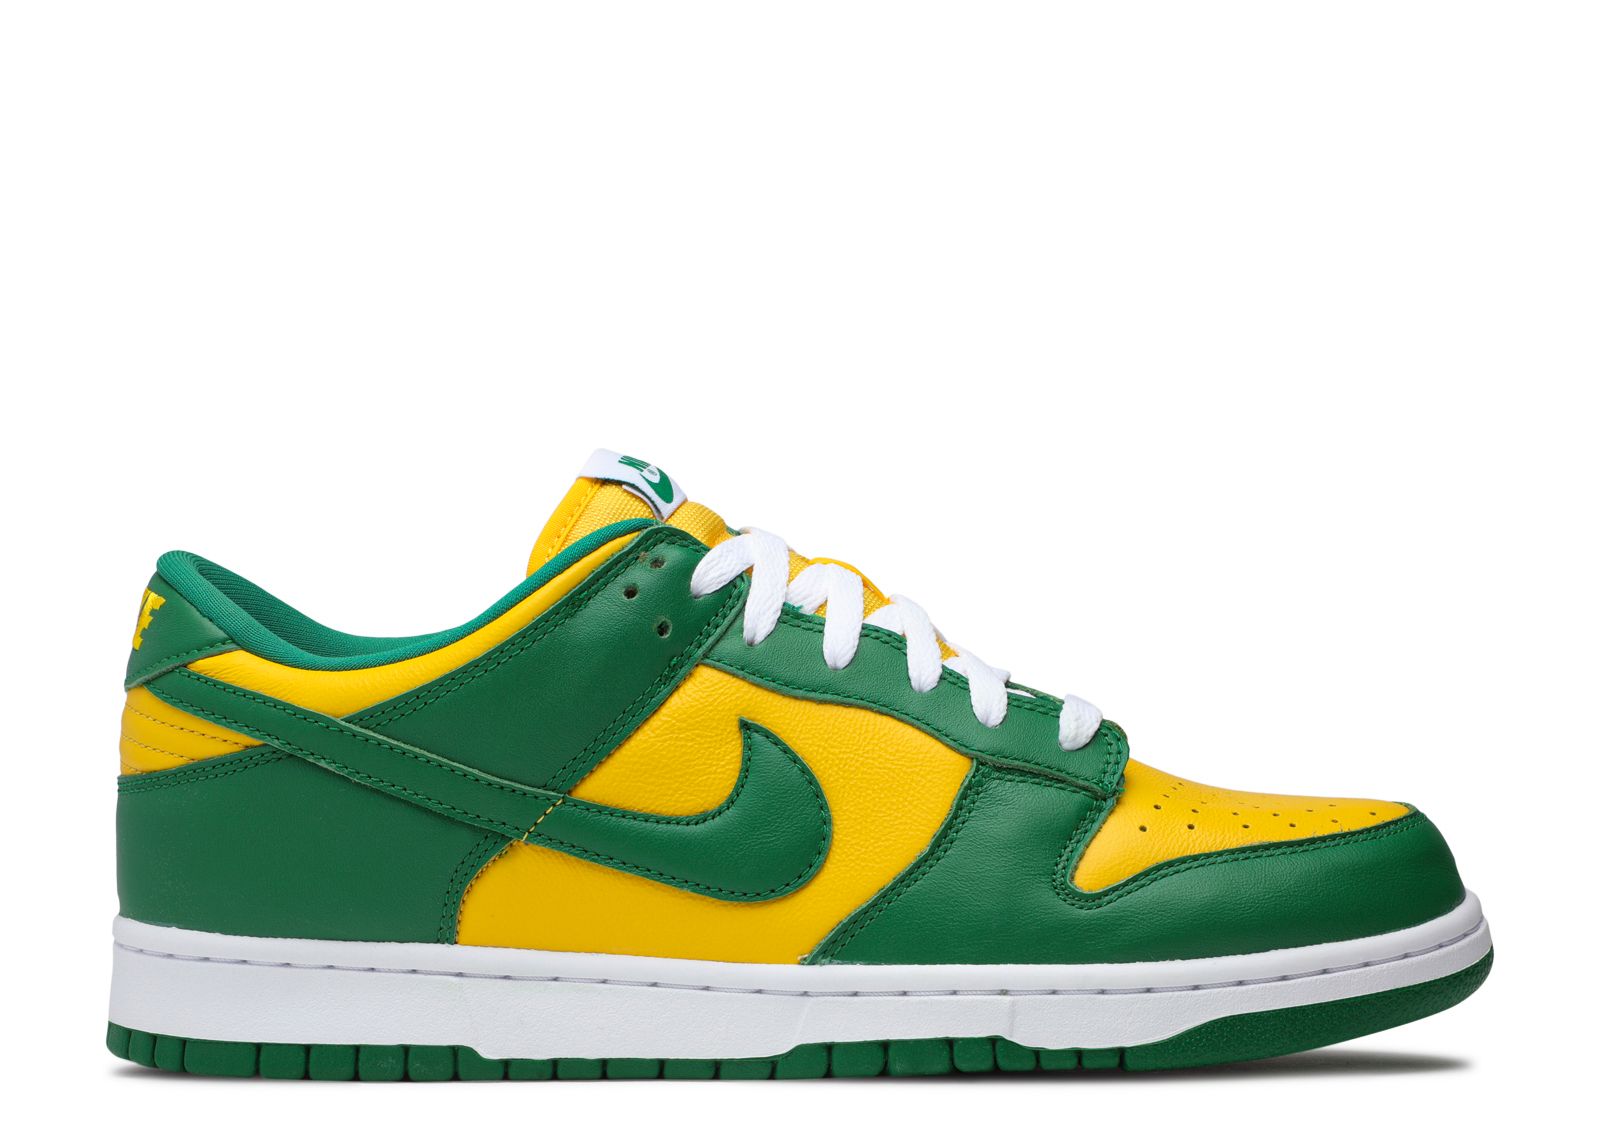 Dunk Low 'Dusty Olive' - Nike - DH5360 300 - dusty olive/pro gold